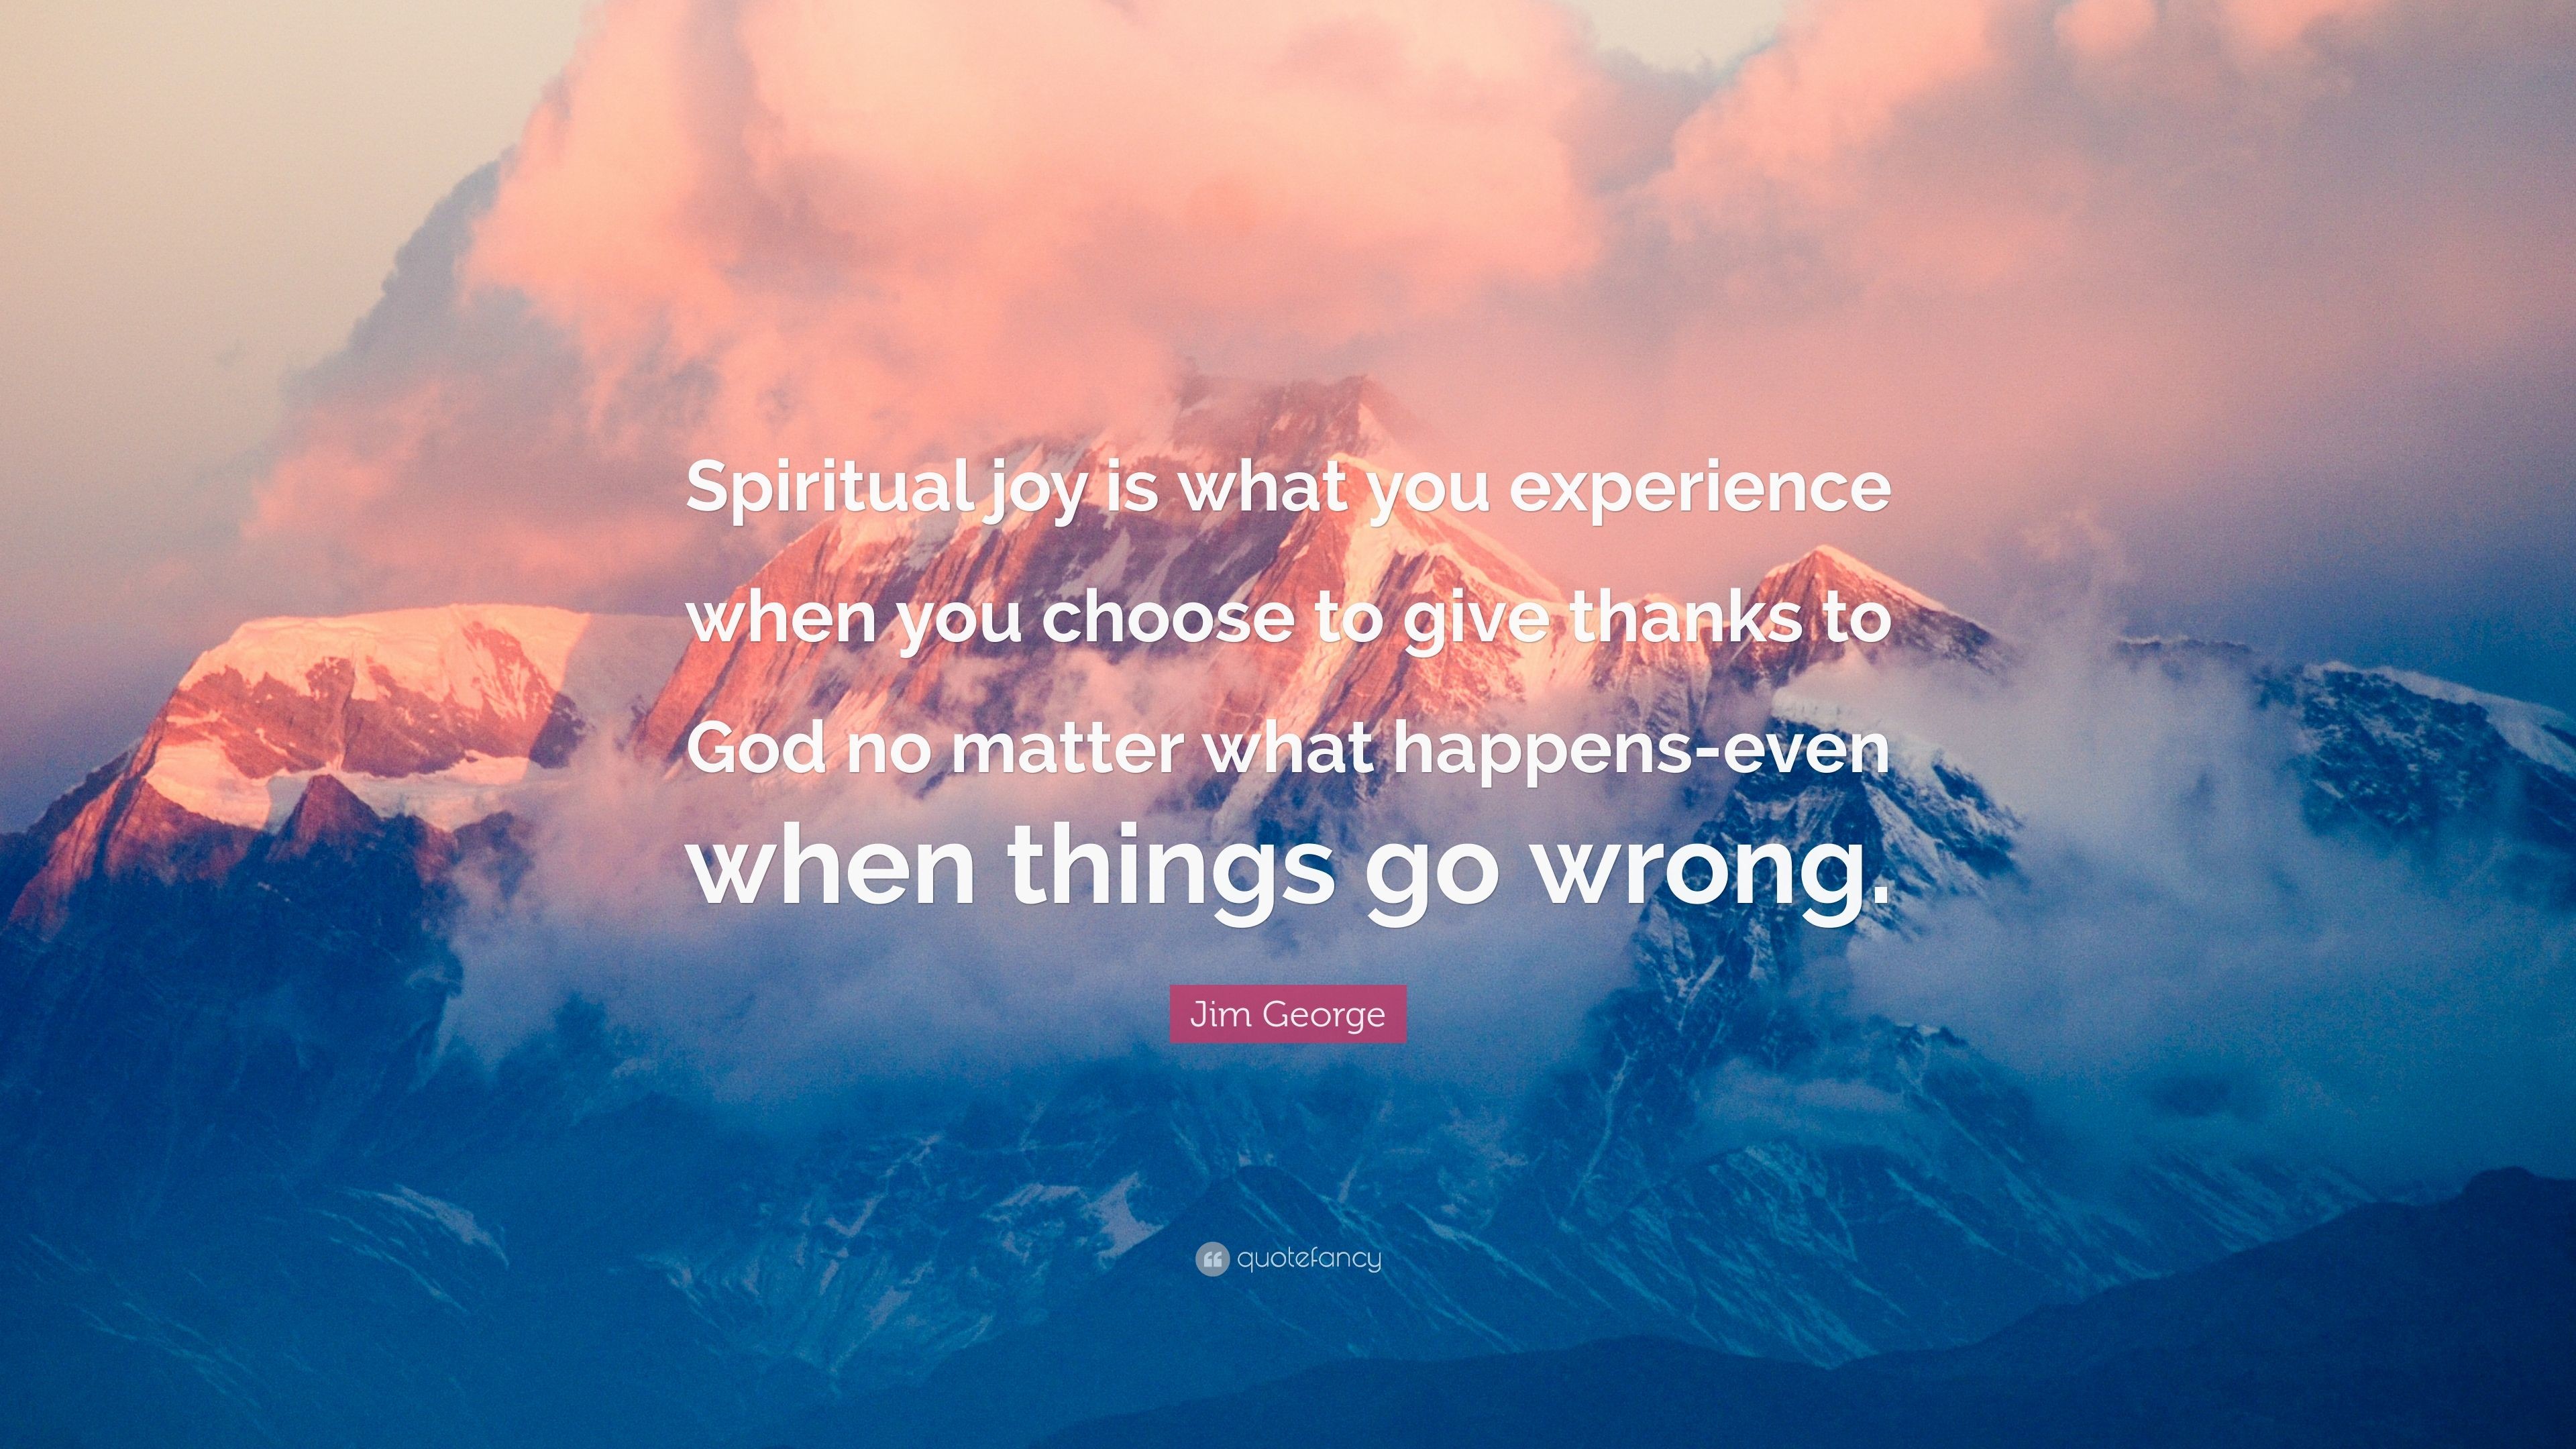 3840x2160 Jim George Quote: “Spiritual joy is what you experience when you choose to  give